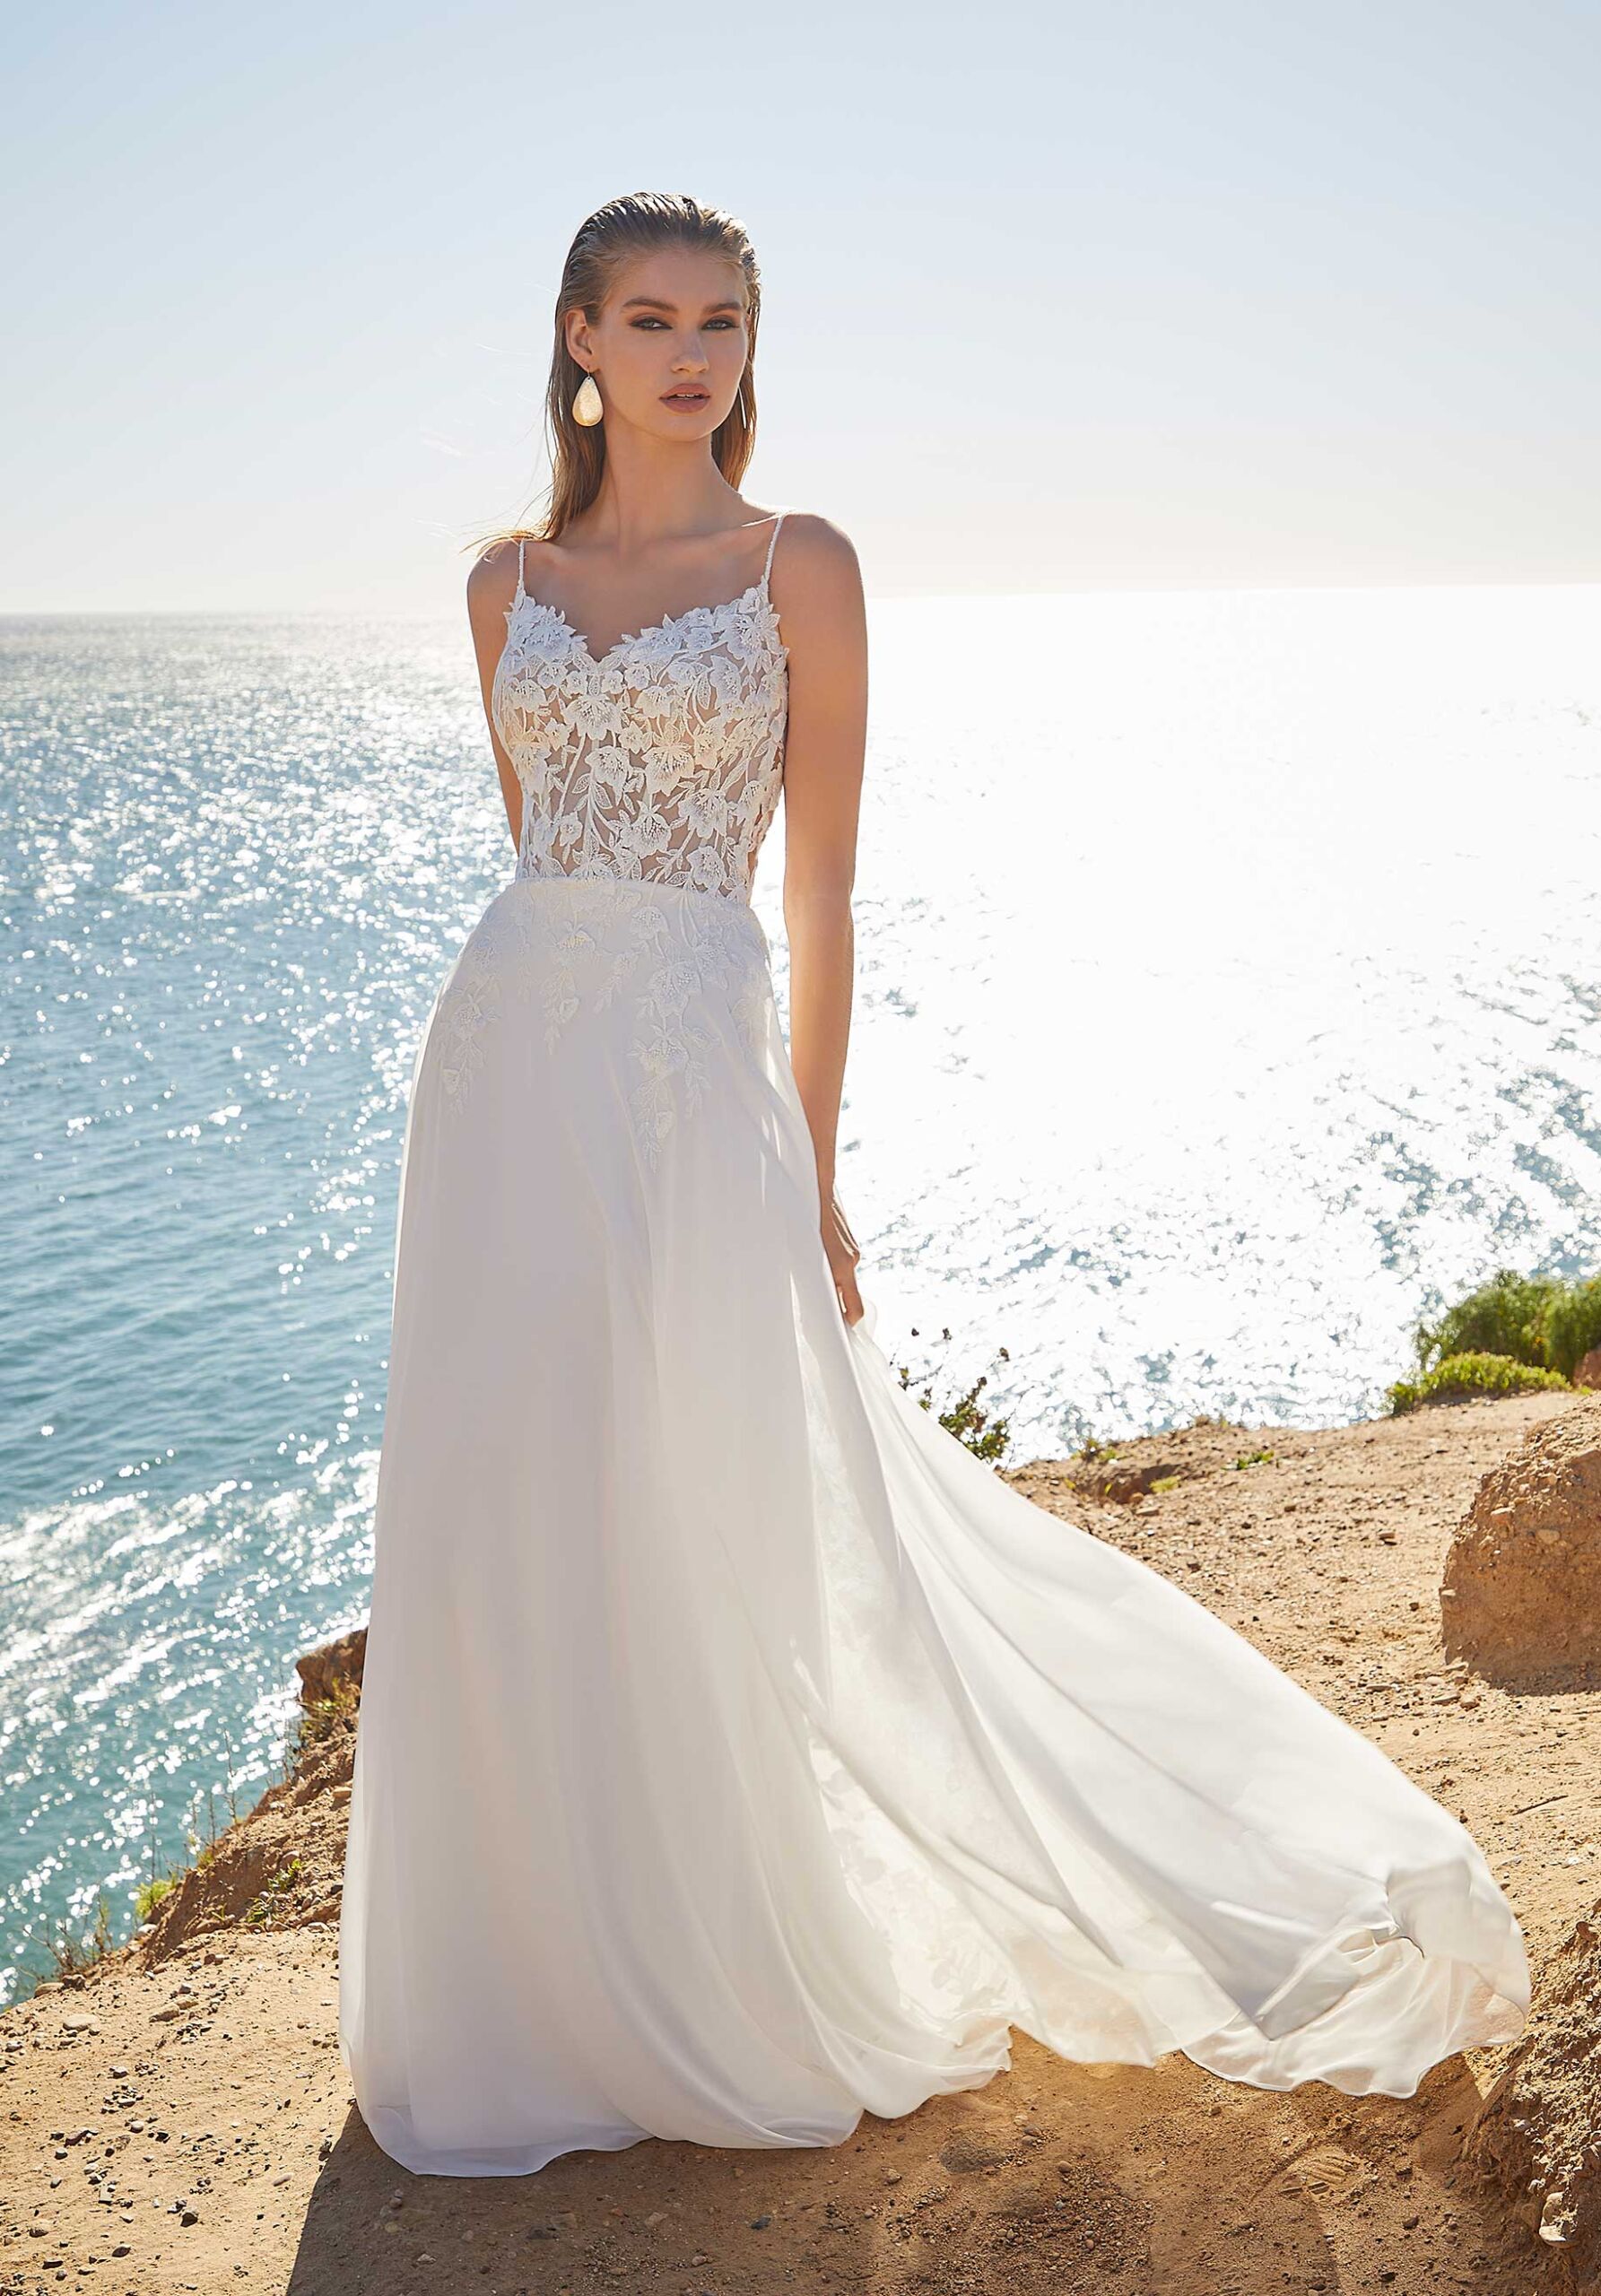 6 Fit-and-Flare Dress Ideas for Your Fantasy Wedding - Viero Bridal